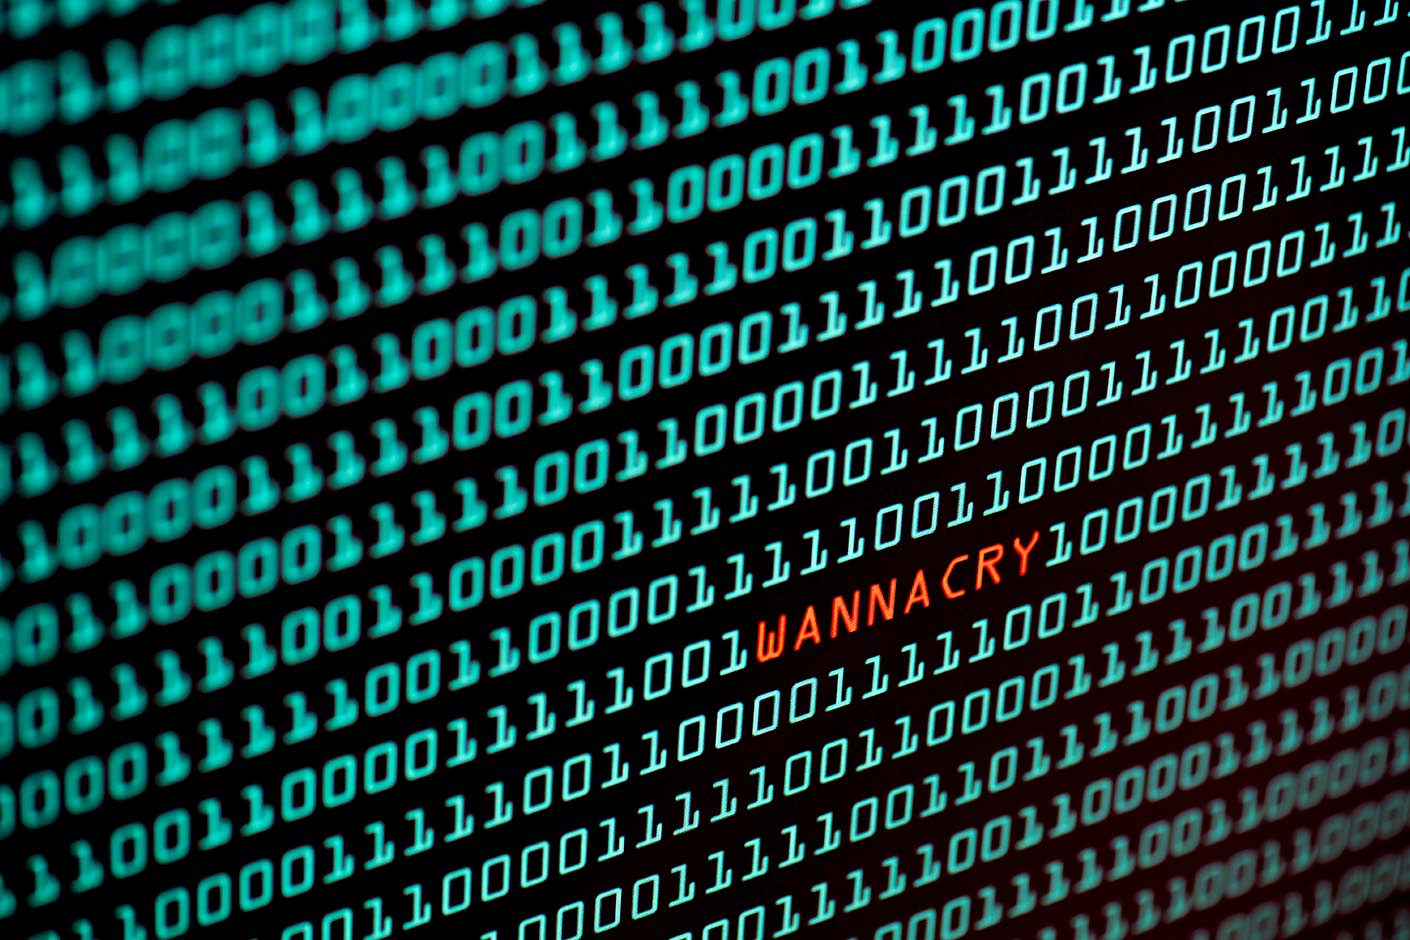 globale-events-wannacry-ransomware